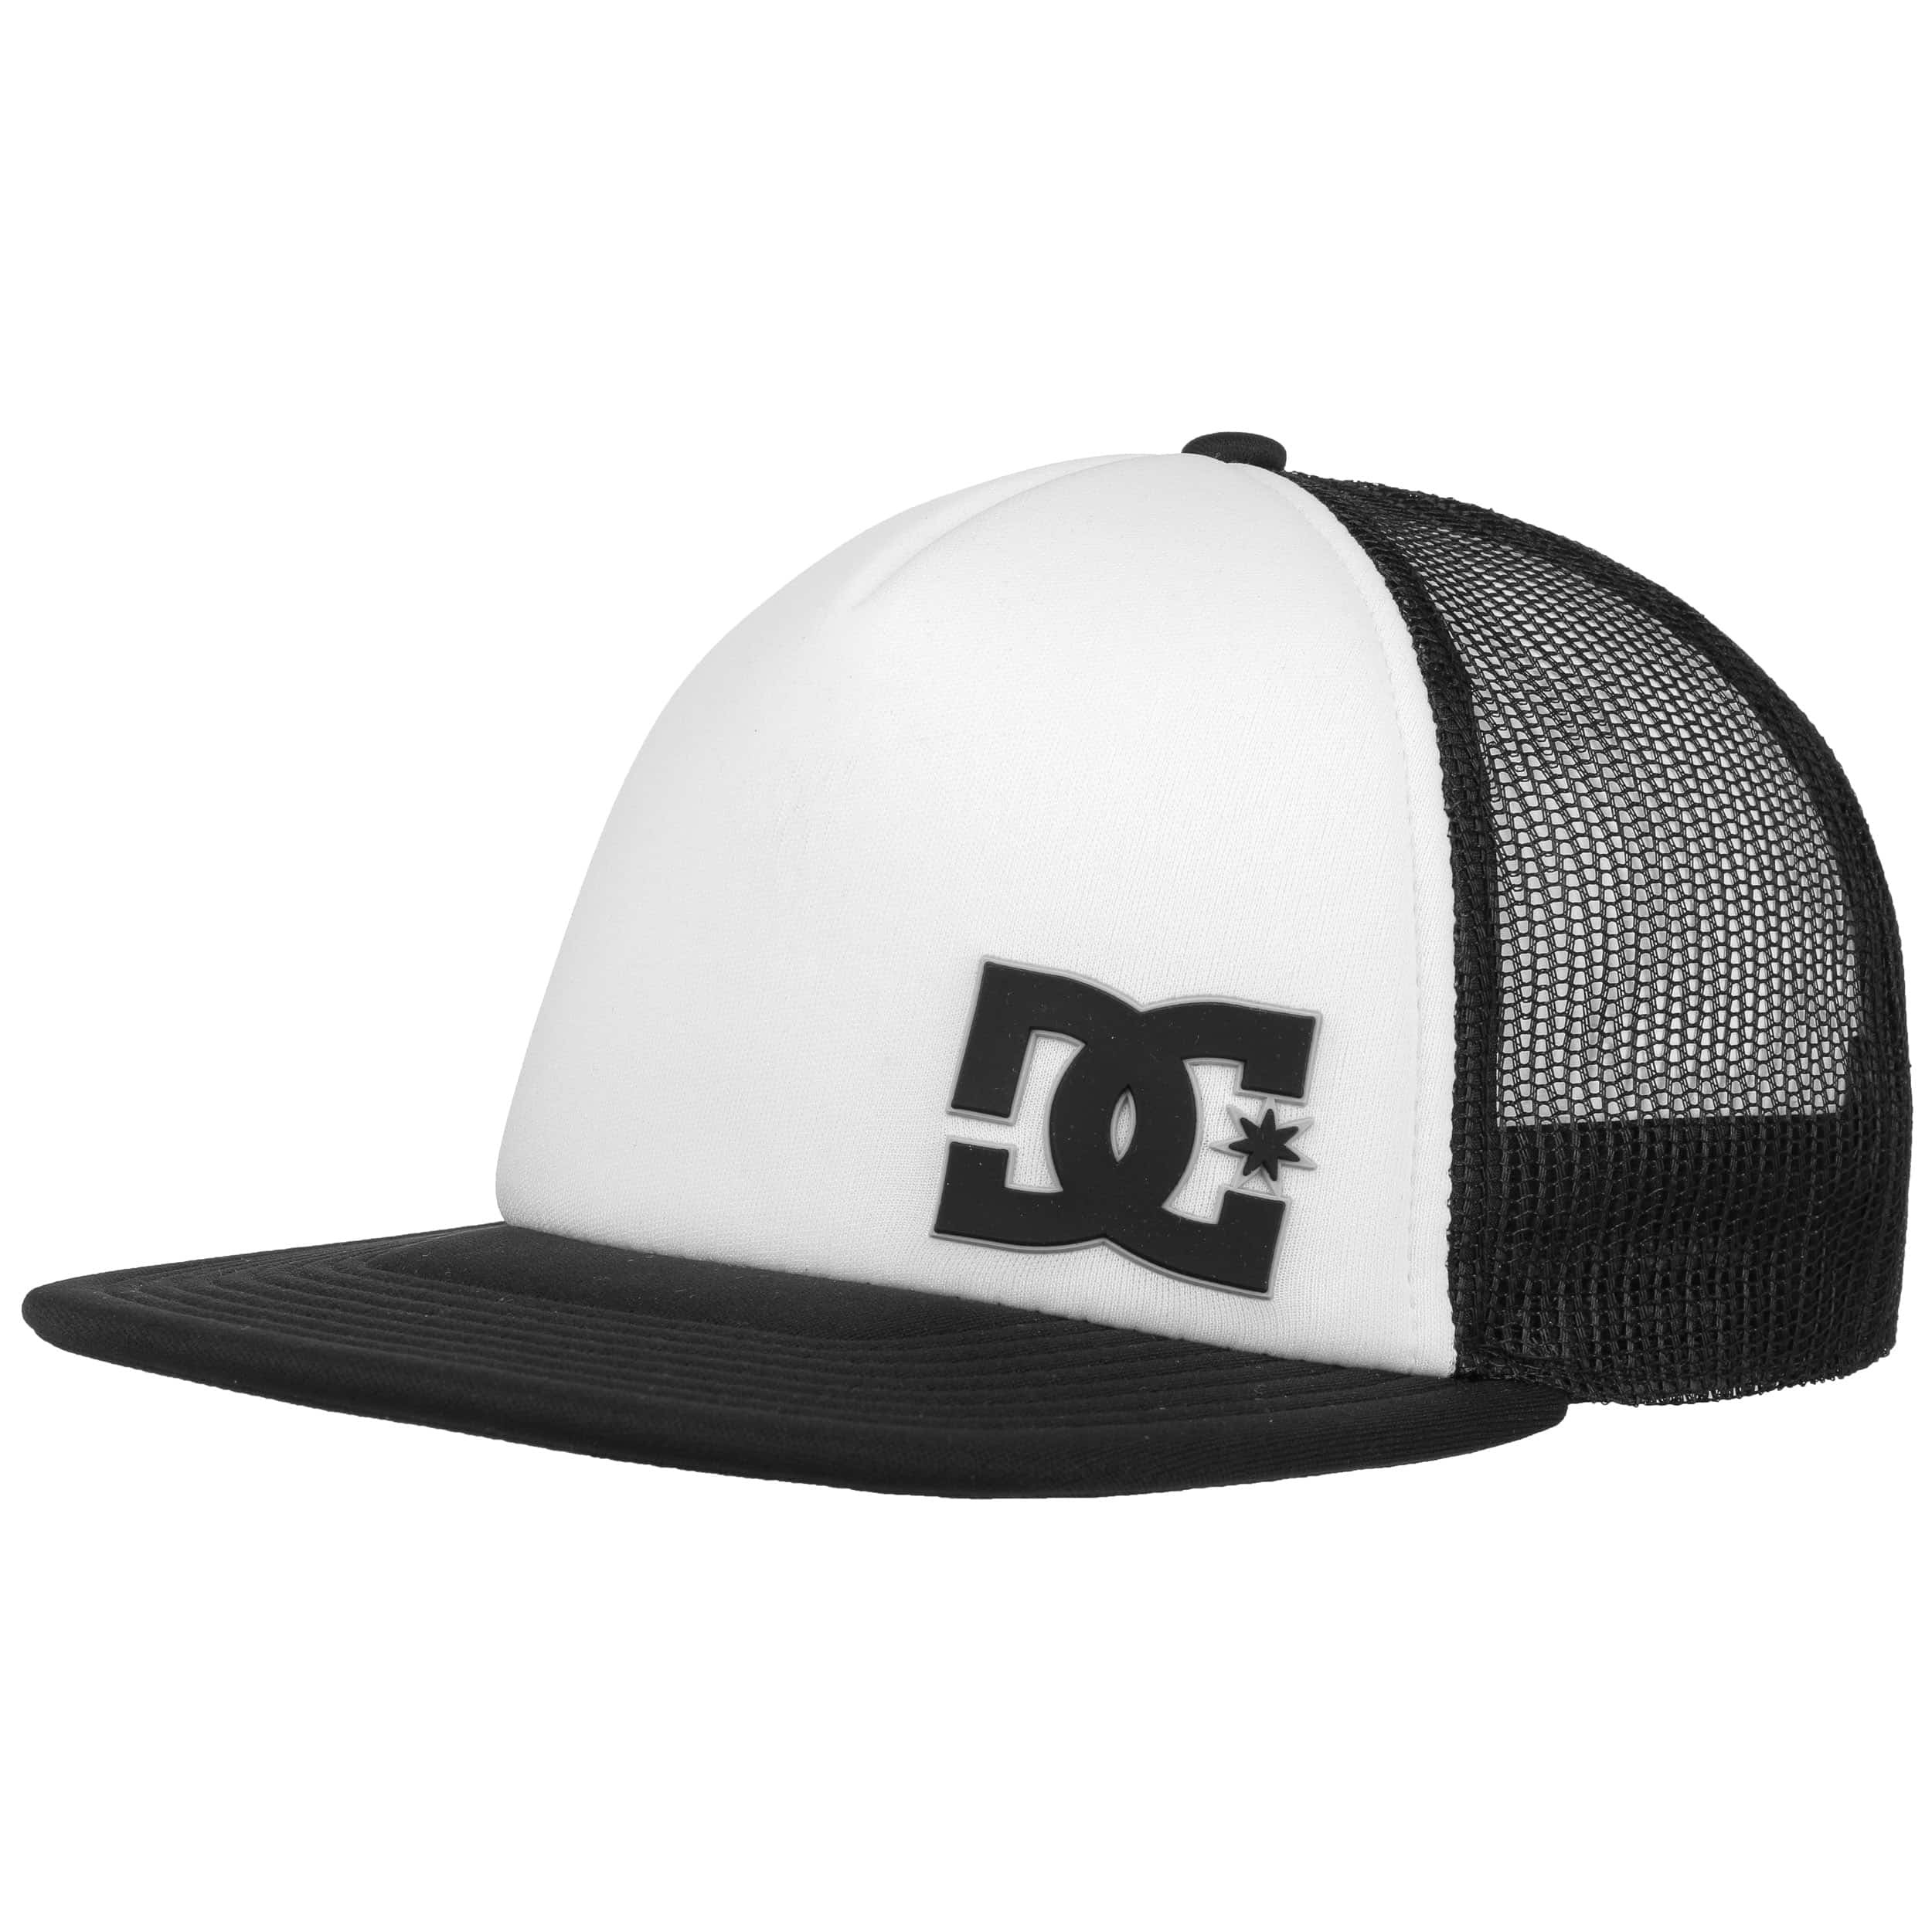 Madglads Trucker Cap by DC Shoes Co 